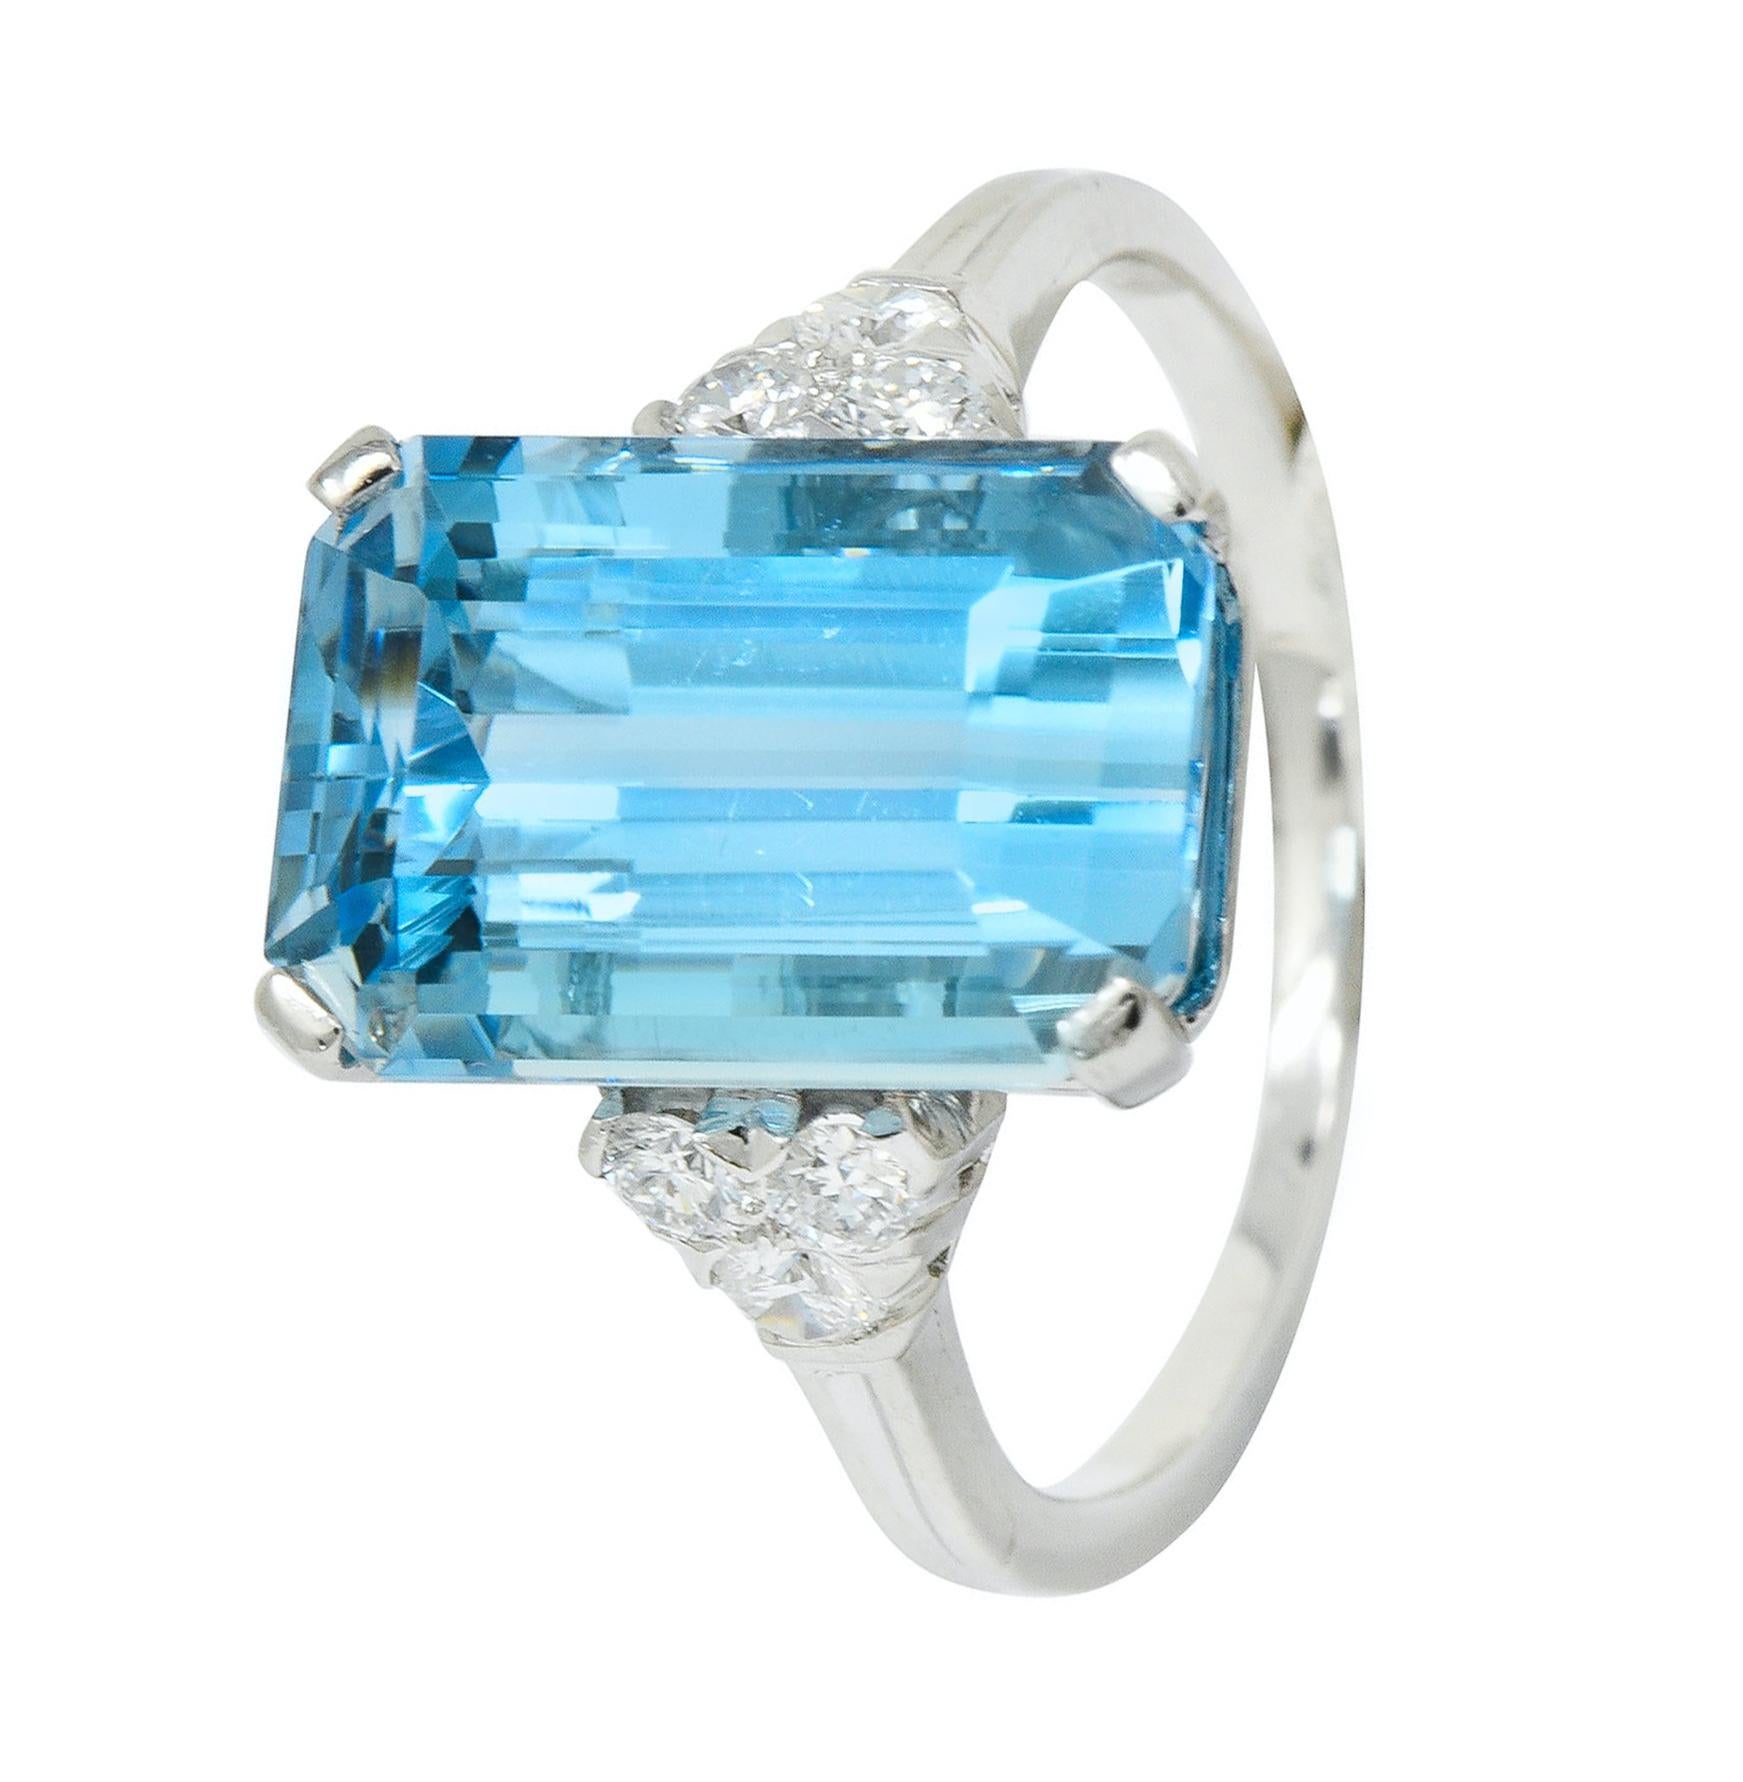 Centering a basket set emerald cut aquamarine weighing approximately 7.08 carats, transparent and a vivid sky blue color

Flanked by triangular formations of round brilliant cut diamonds weighing in total approximately 0.30 carat, F/G color and VVS